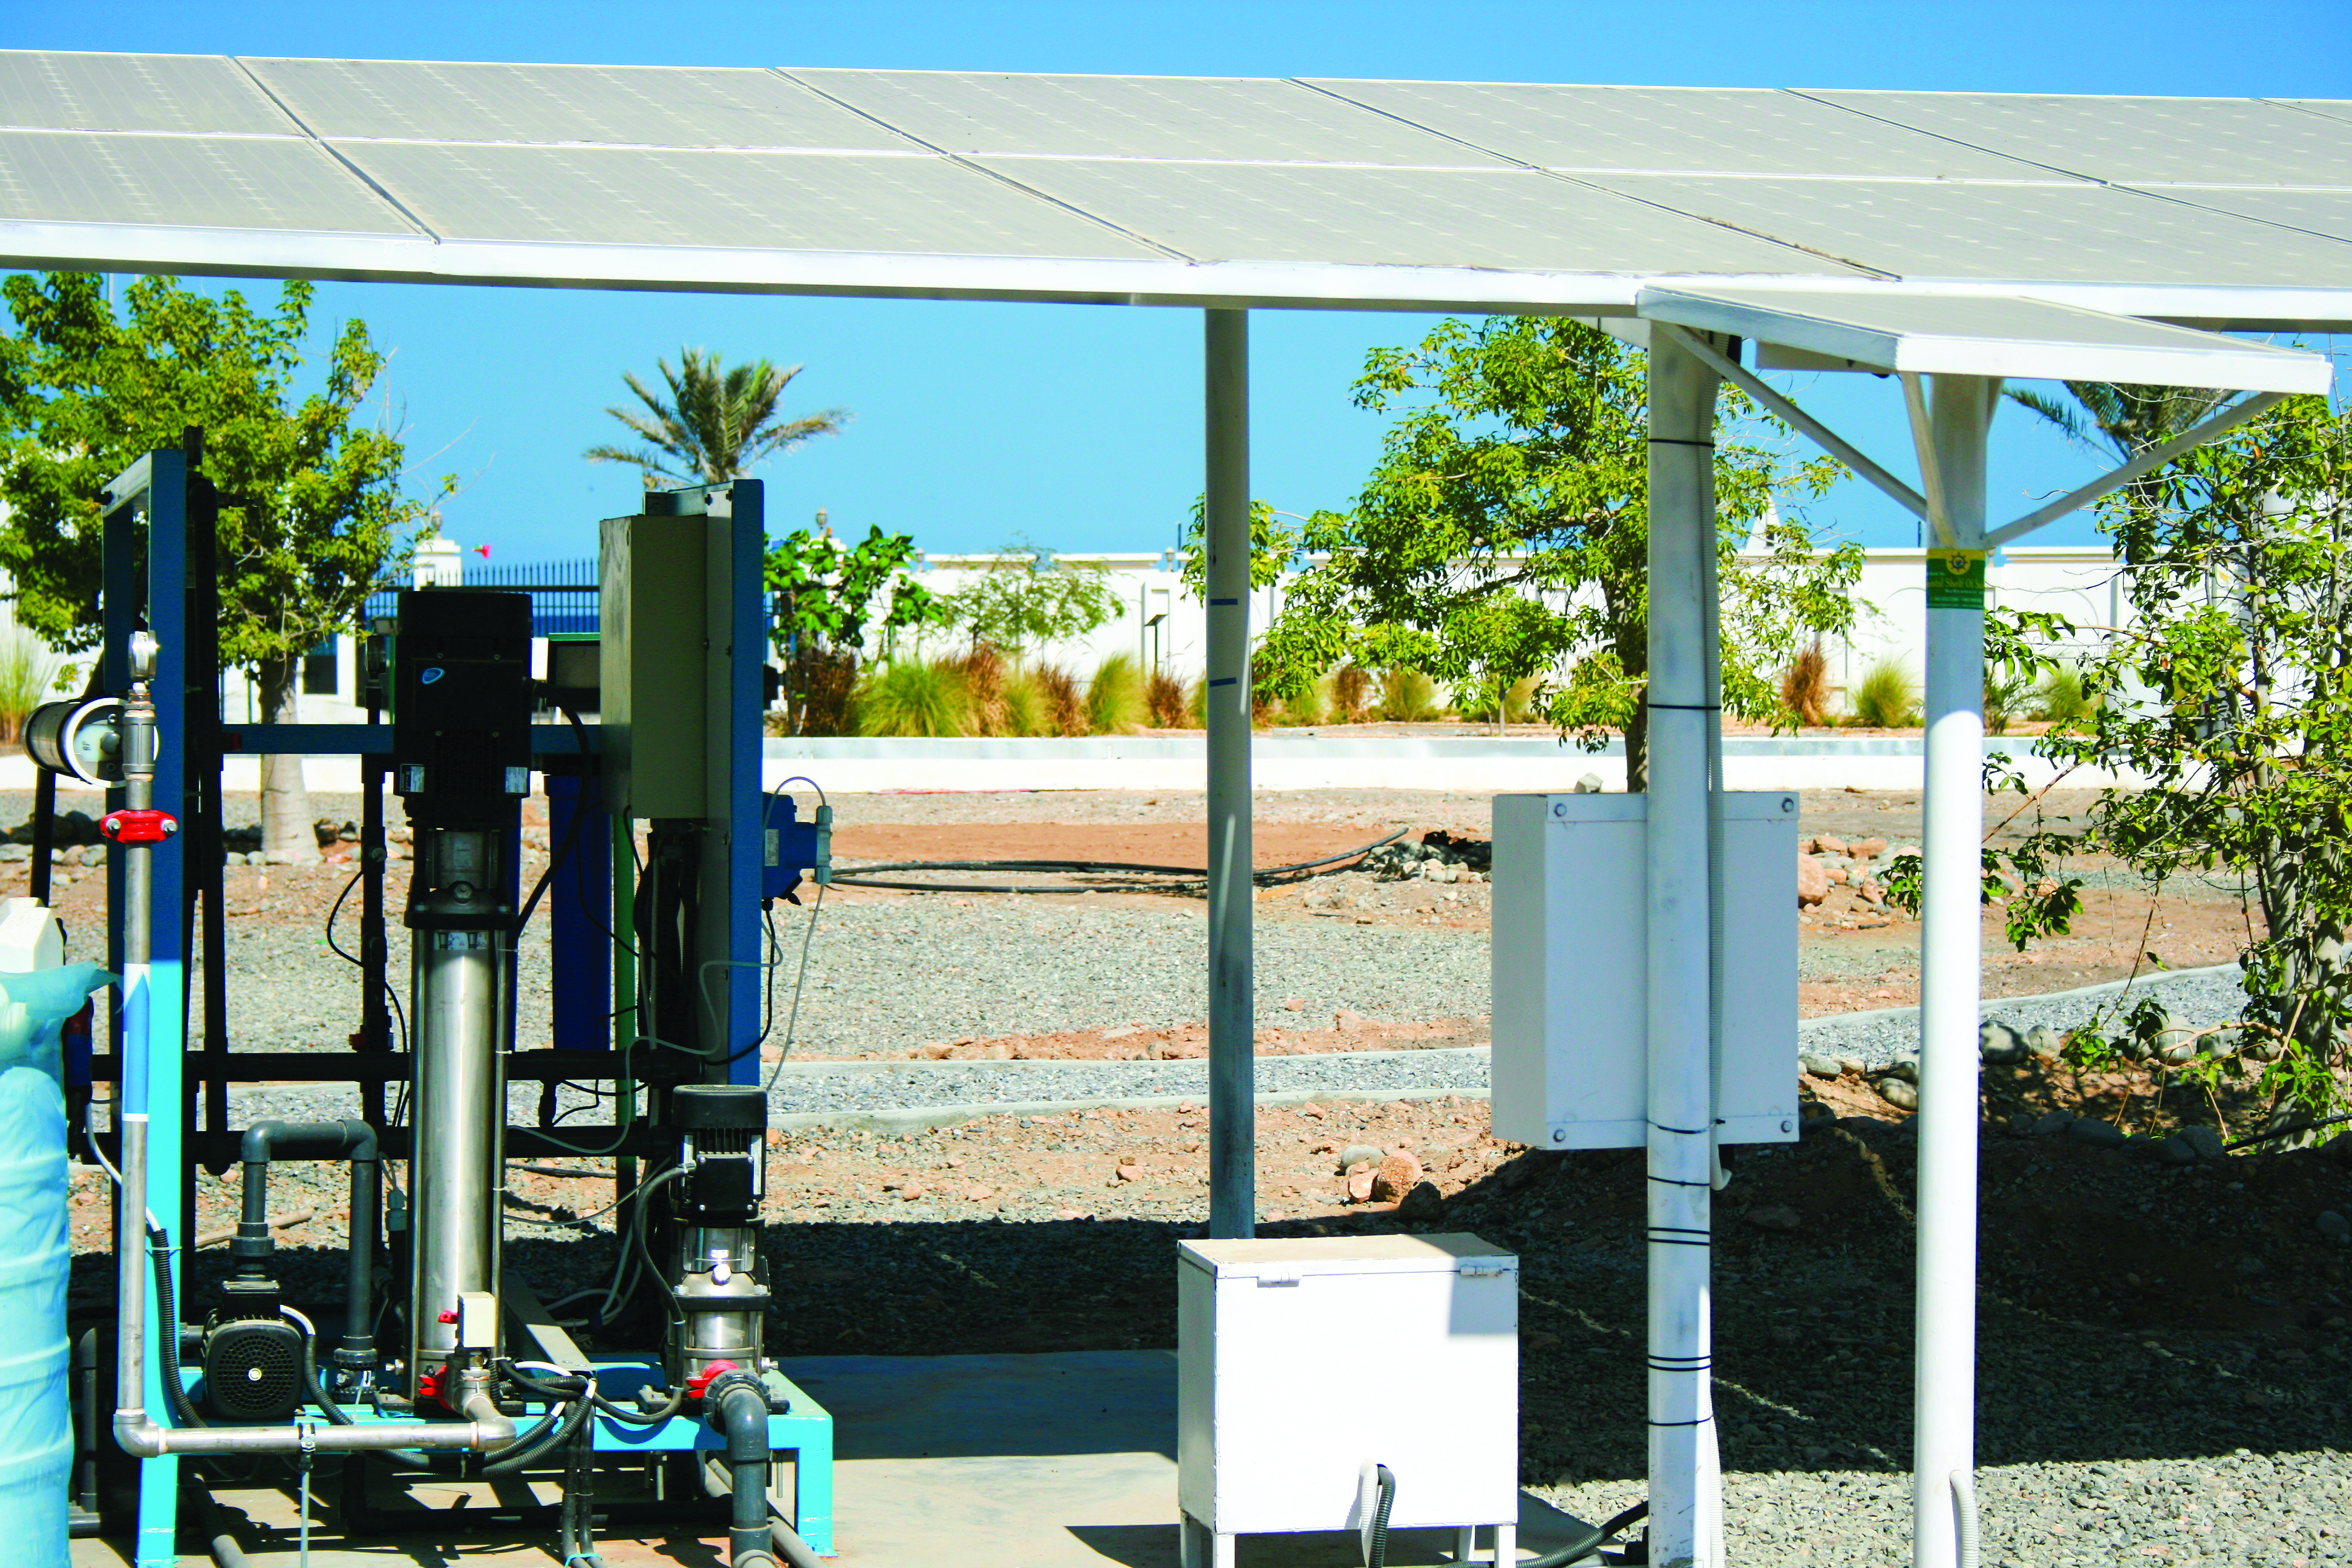 Solar is future energy source for water projects